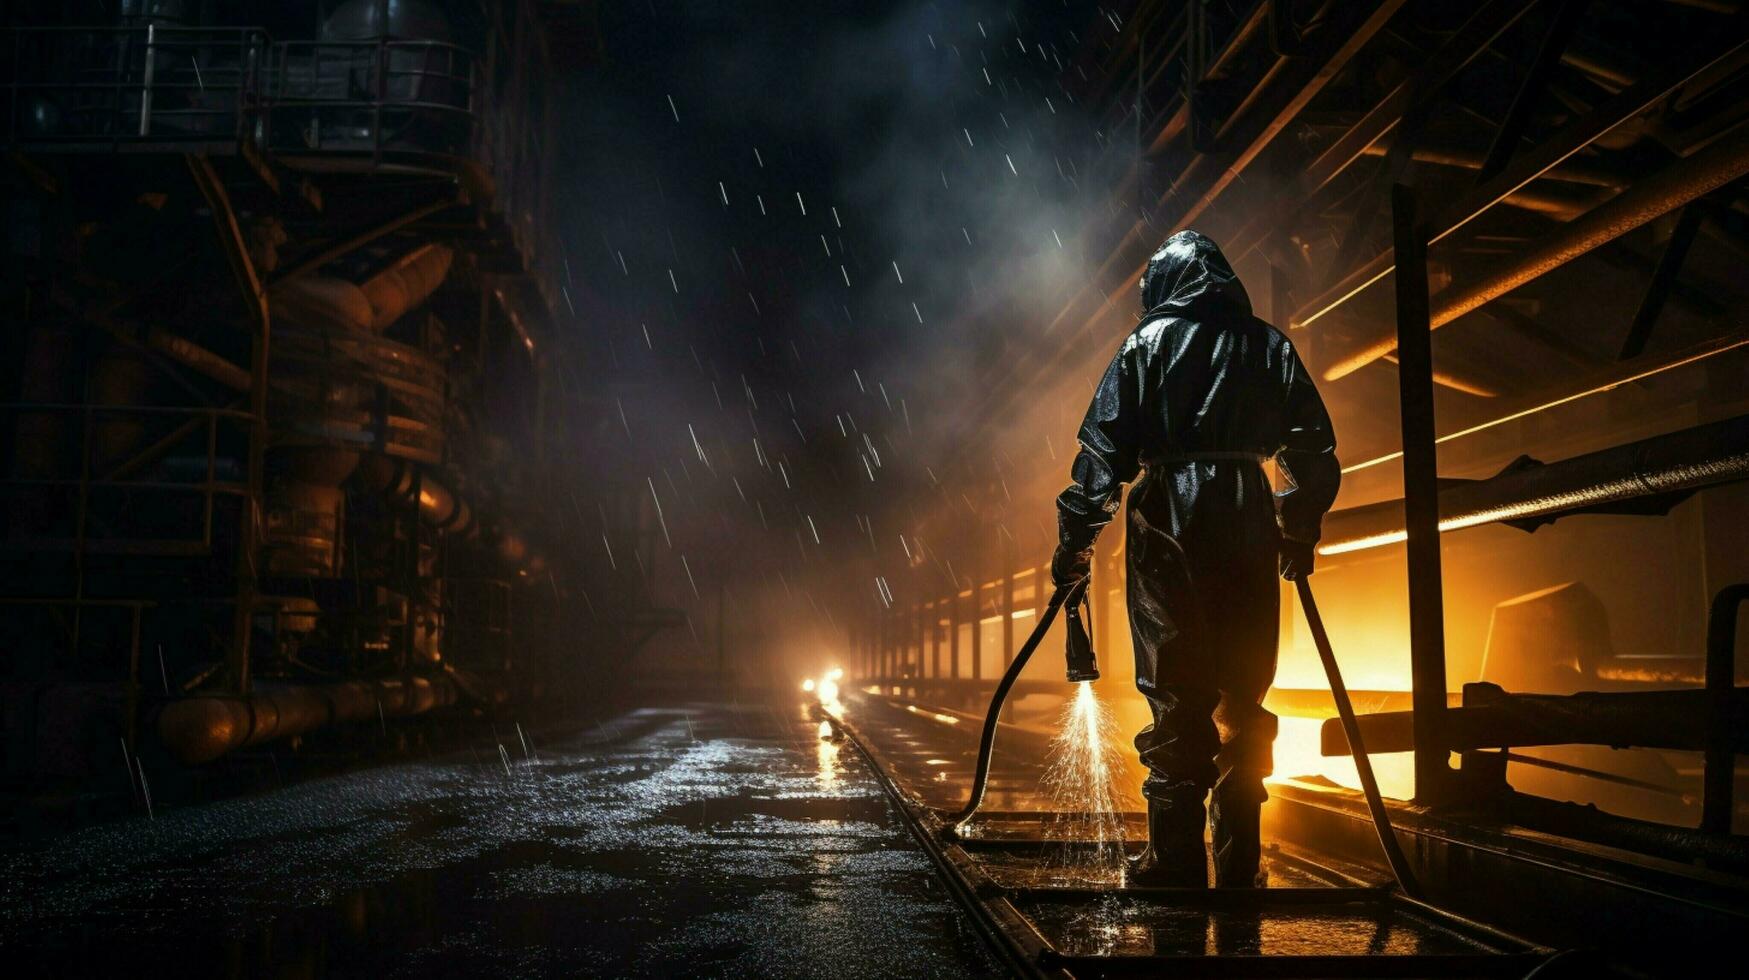 metal industry worker sprays protective suit at night photo